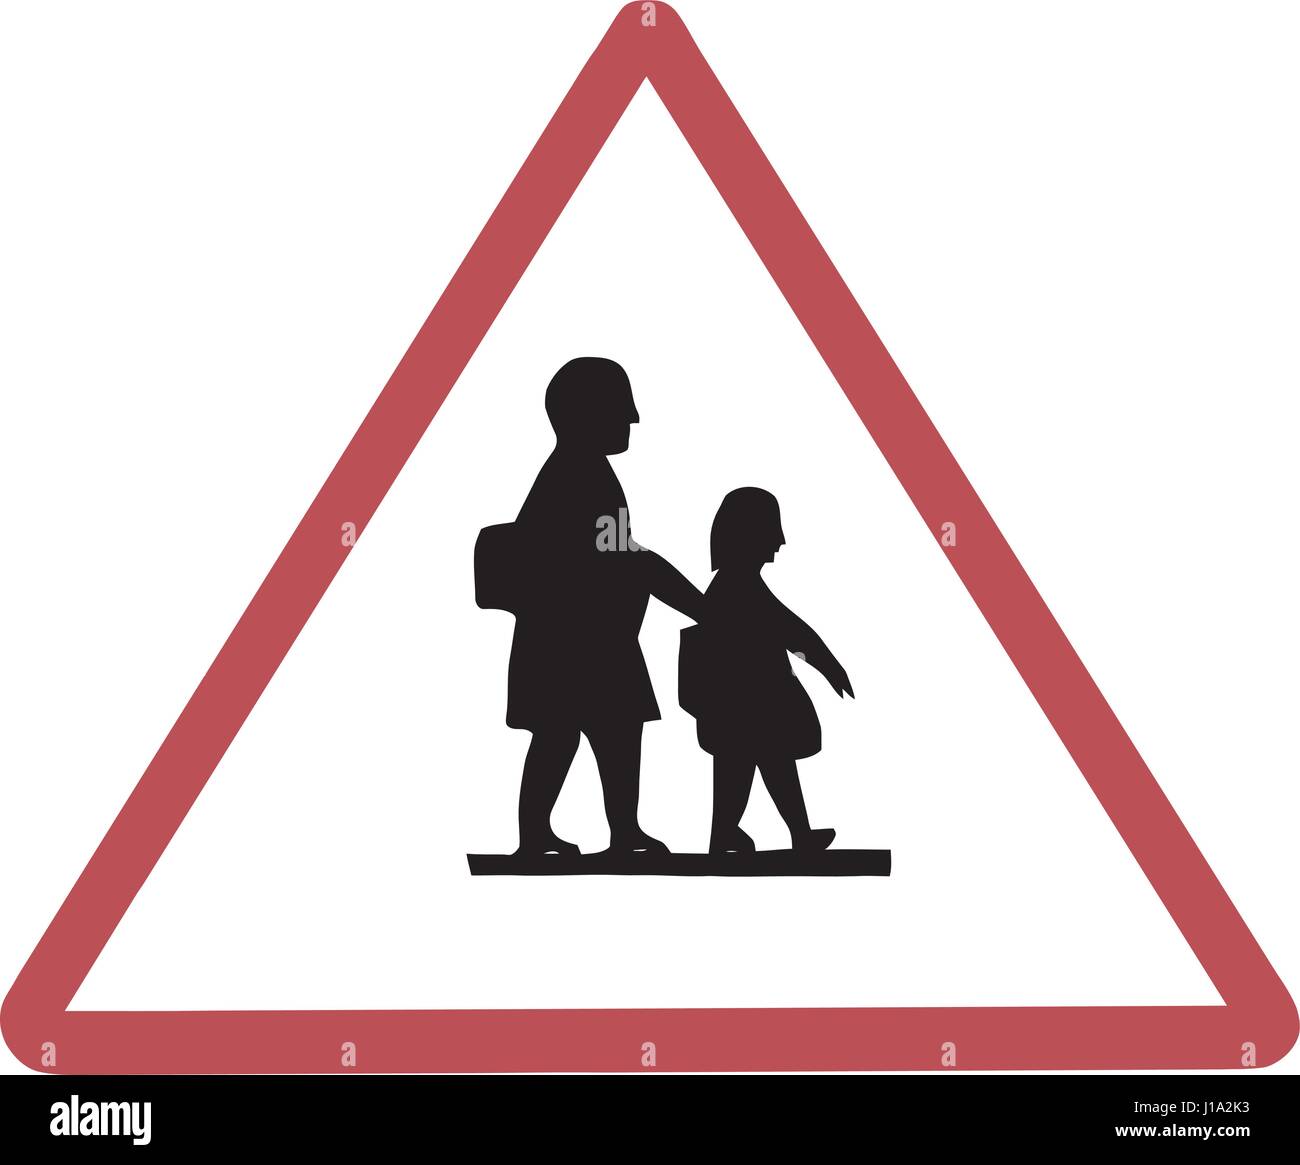 Vector illustration of pedestrian crossing sign on Cyprus roads Stock Vector